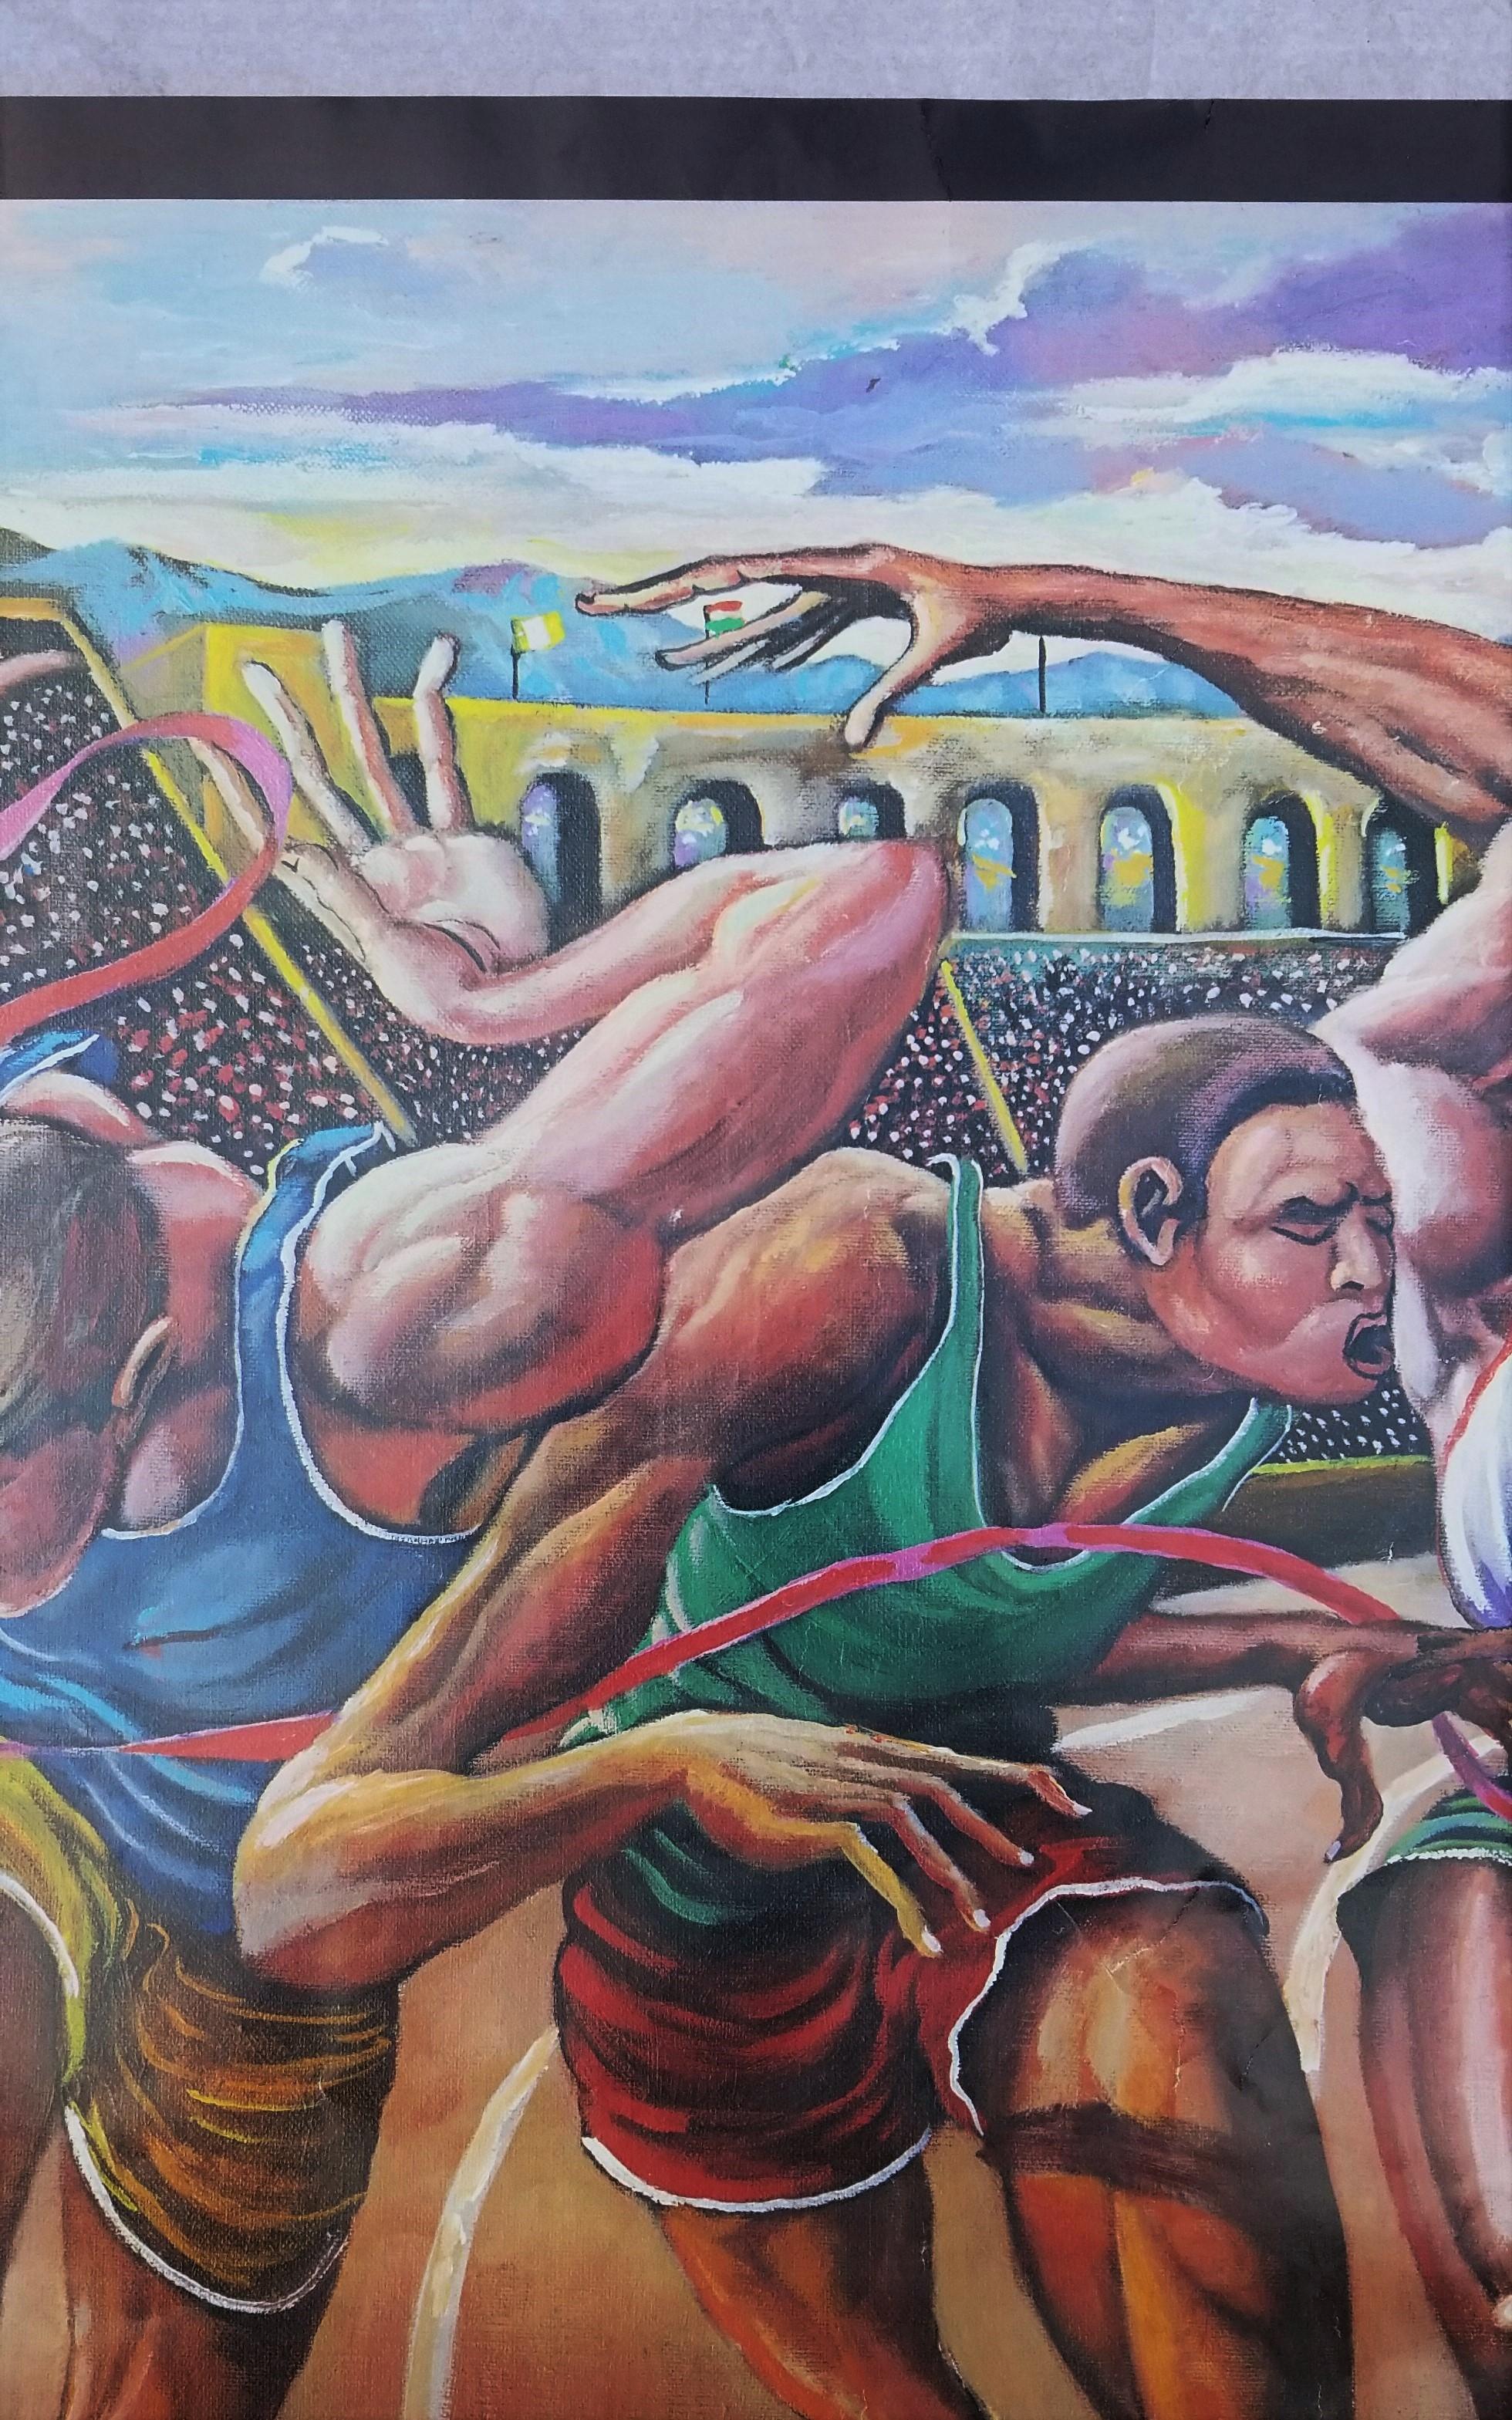 Los Angeles 1984 Olympic Games (The Finish) Poster (Signed) /// Black Art Sports - Gray Figurative Print by Ernie Barnes